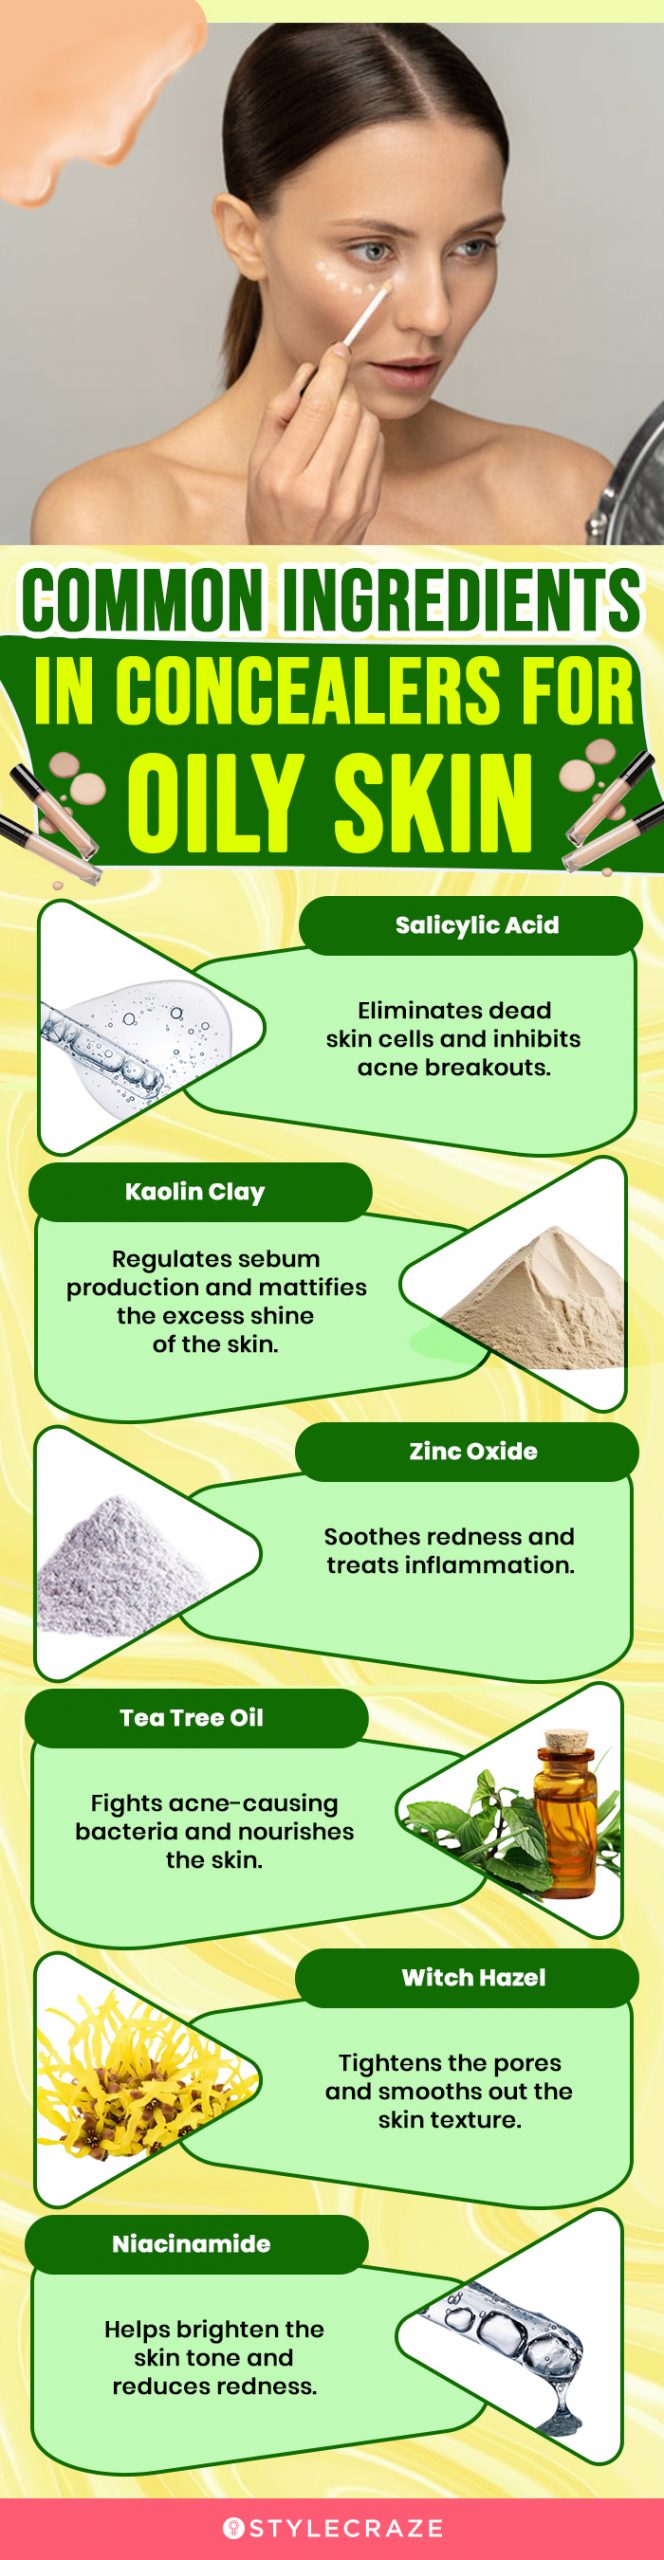 Common Ingredients In Concealers For Oily Skin (infographic)